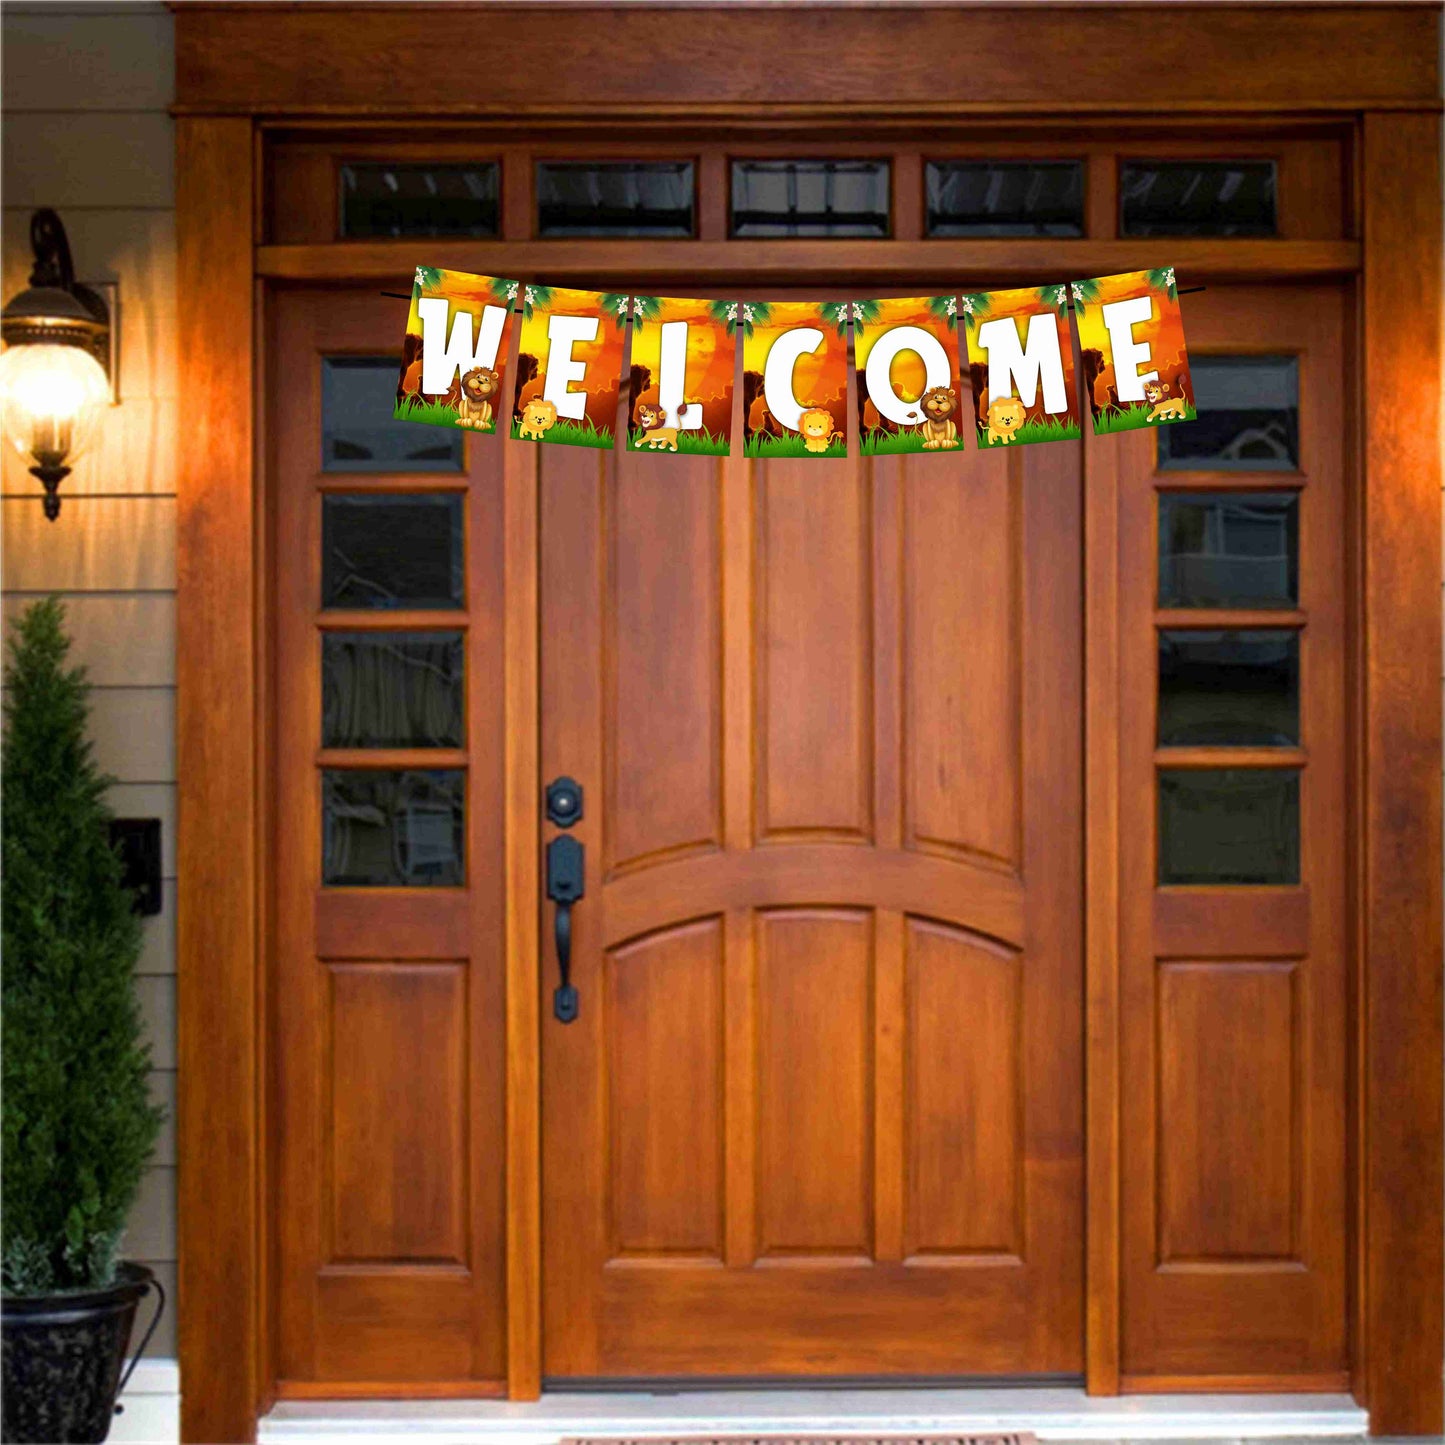 Lion Welcome Banner for Party Entrance Home Welcoming Birthday Decoration Party Item